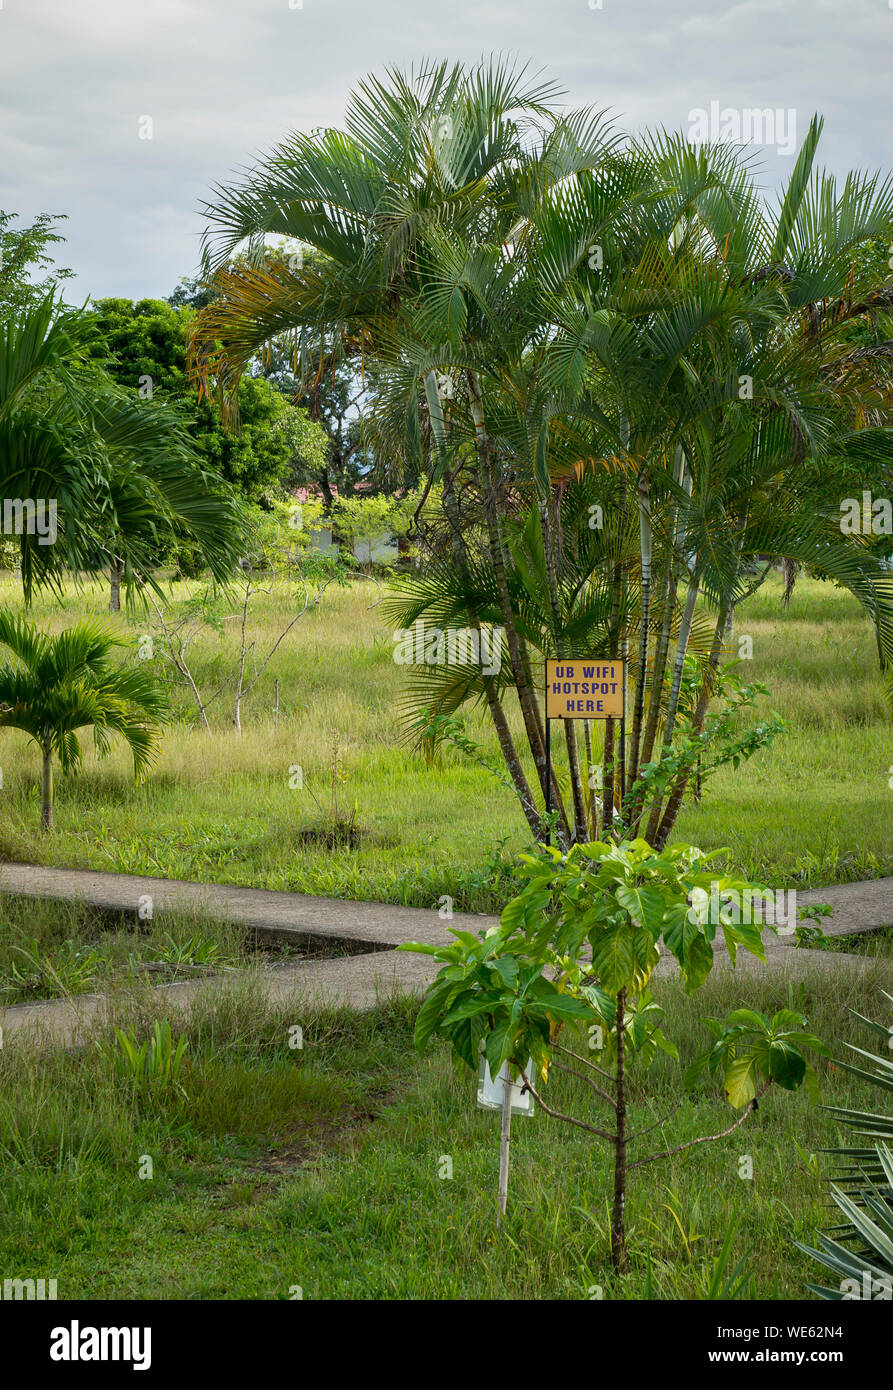 WiFi Hotspot sign attached to a tree on the University of Belize campus in Belmopan Stock Photo